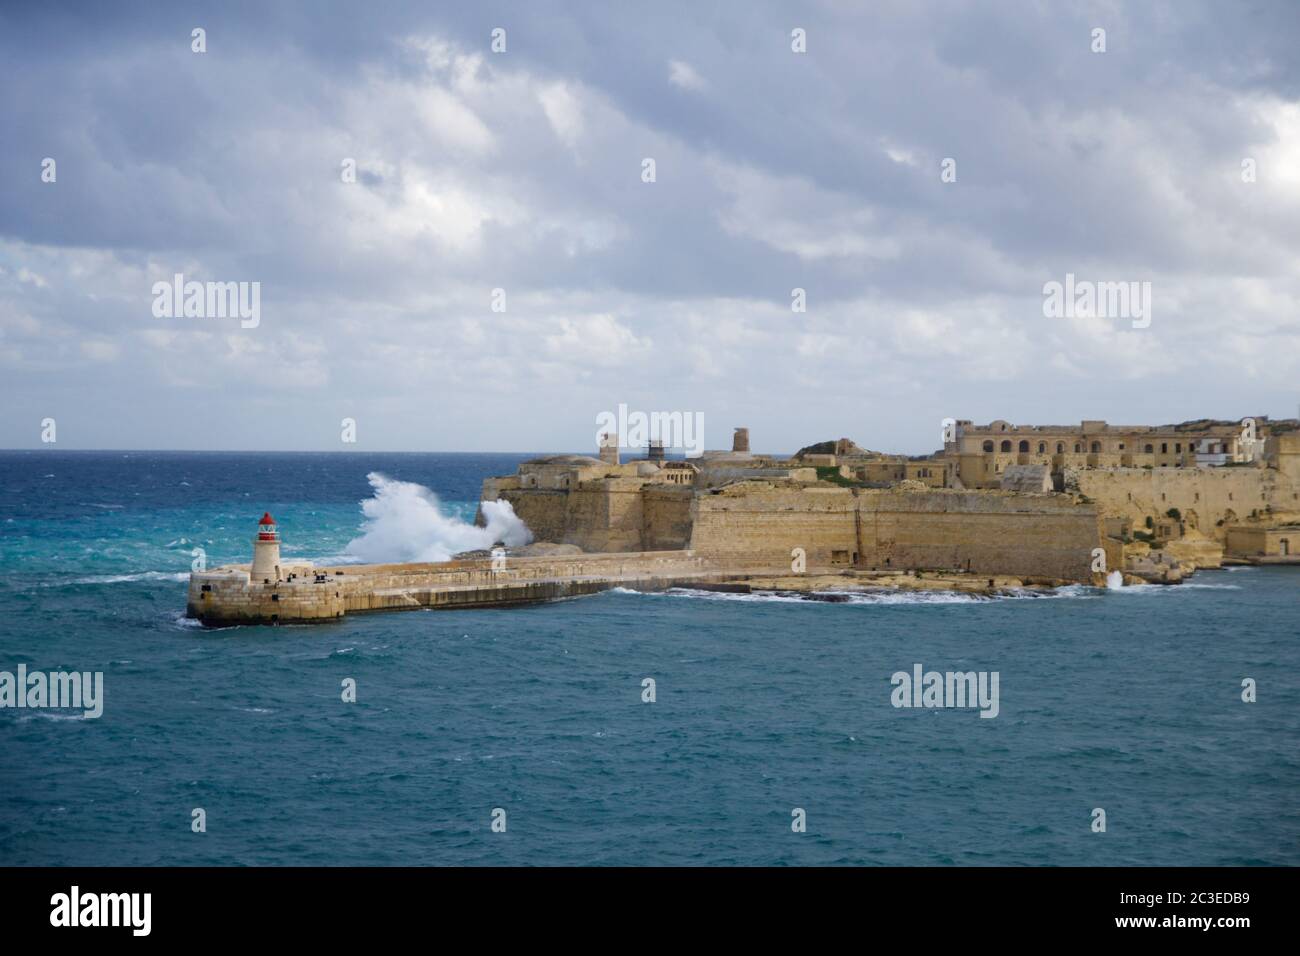 VALLETTA, MALTA - DEC 31st, 2019: View from Fort St Elmo on to the Ricasoli Grand Harbour East Breakwater and red lighthouse during strong waves Stock Photo